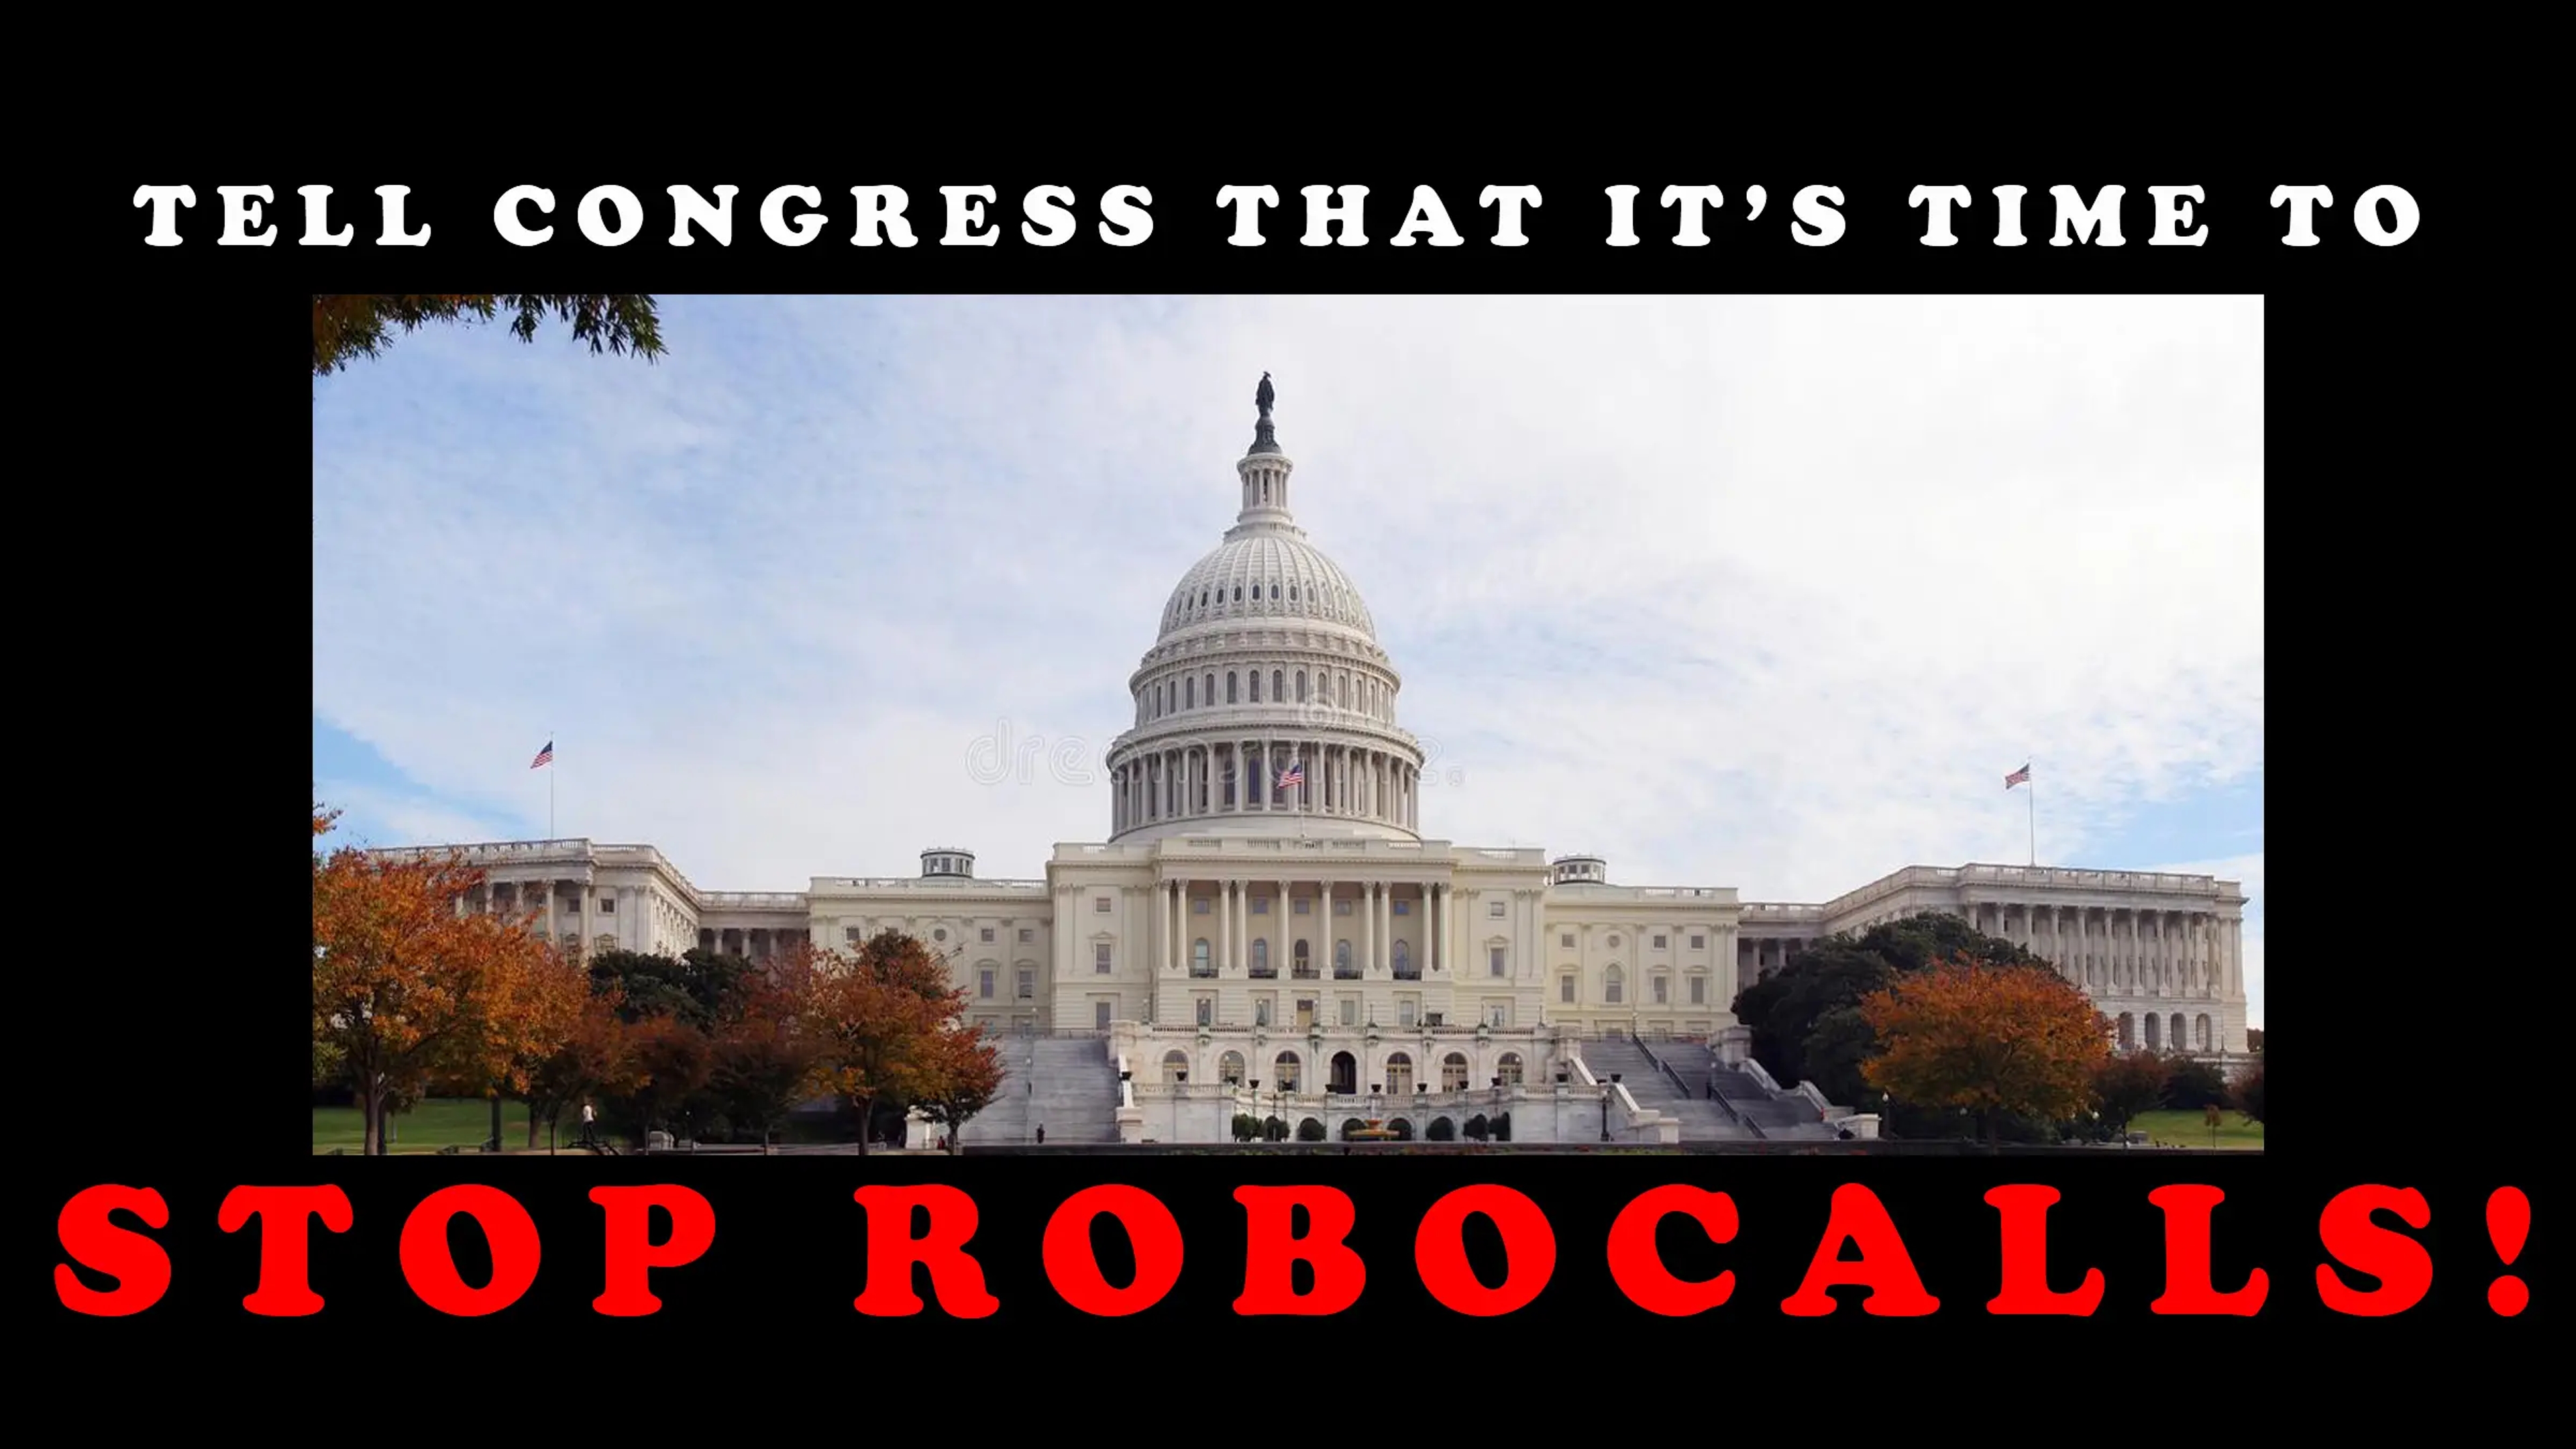 PETITION TO END ROBOCALLS HITS CHANGE.ORG